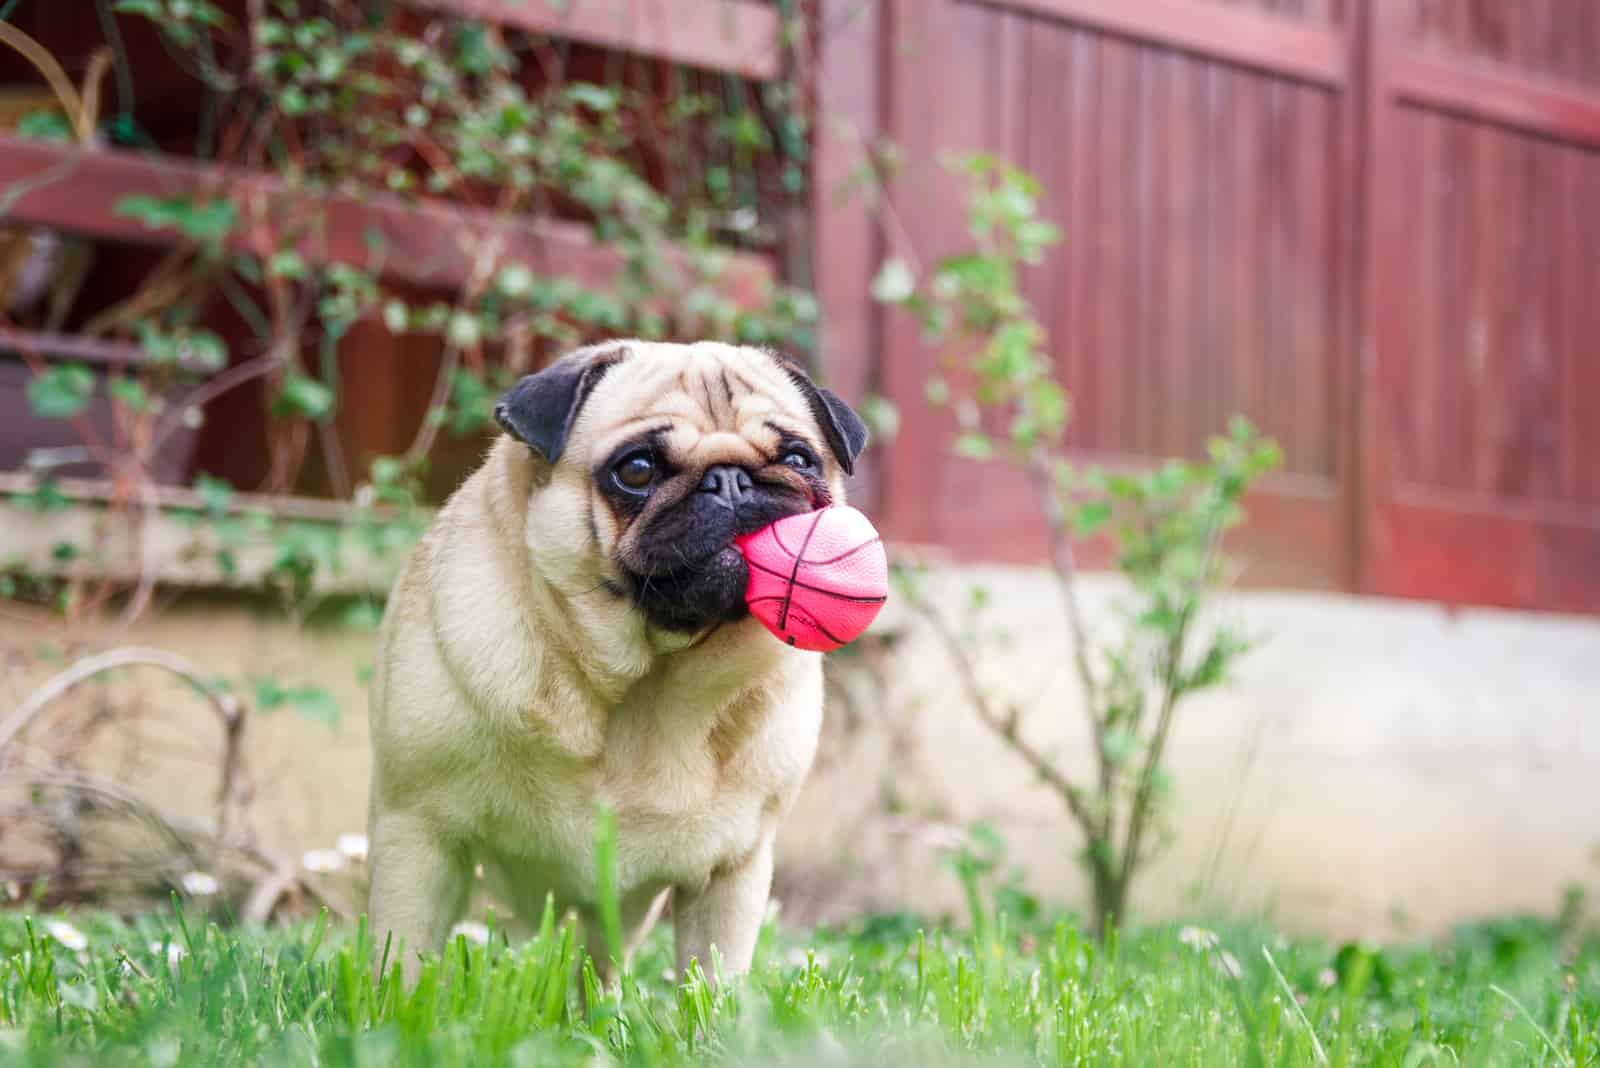 Funny pug holding a ball in mouth